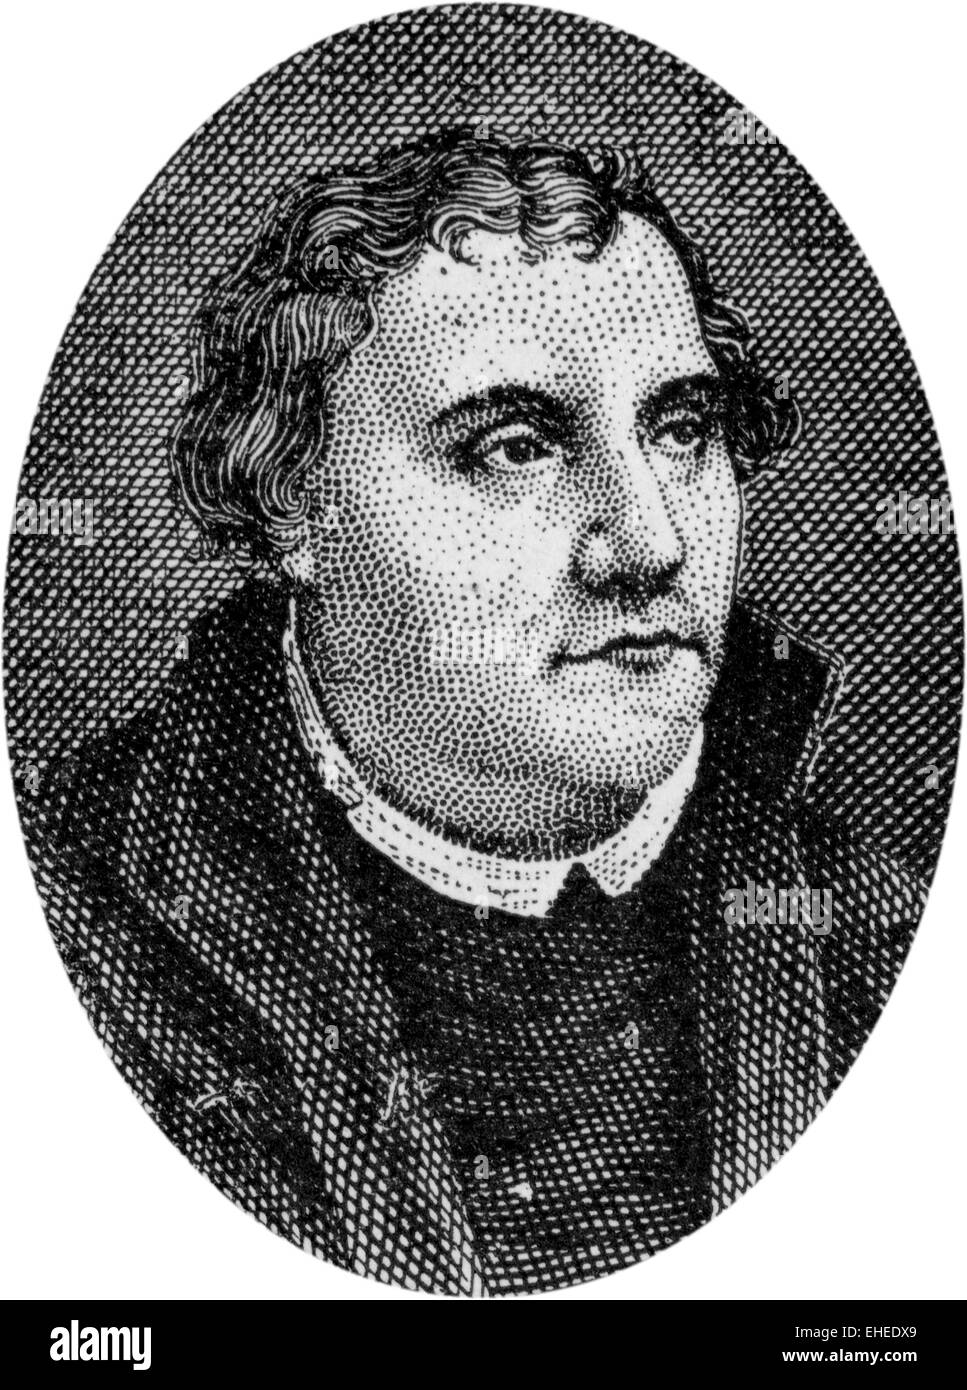 Engraving of Martin Luther, 1483 - 1546, leader of the Reformation in Germany Stock Photo